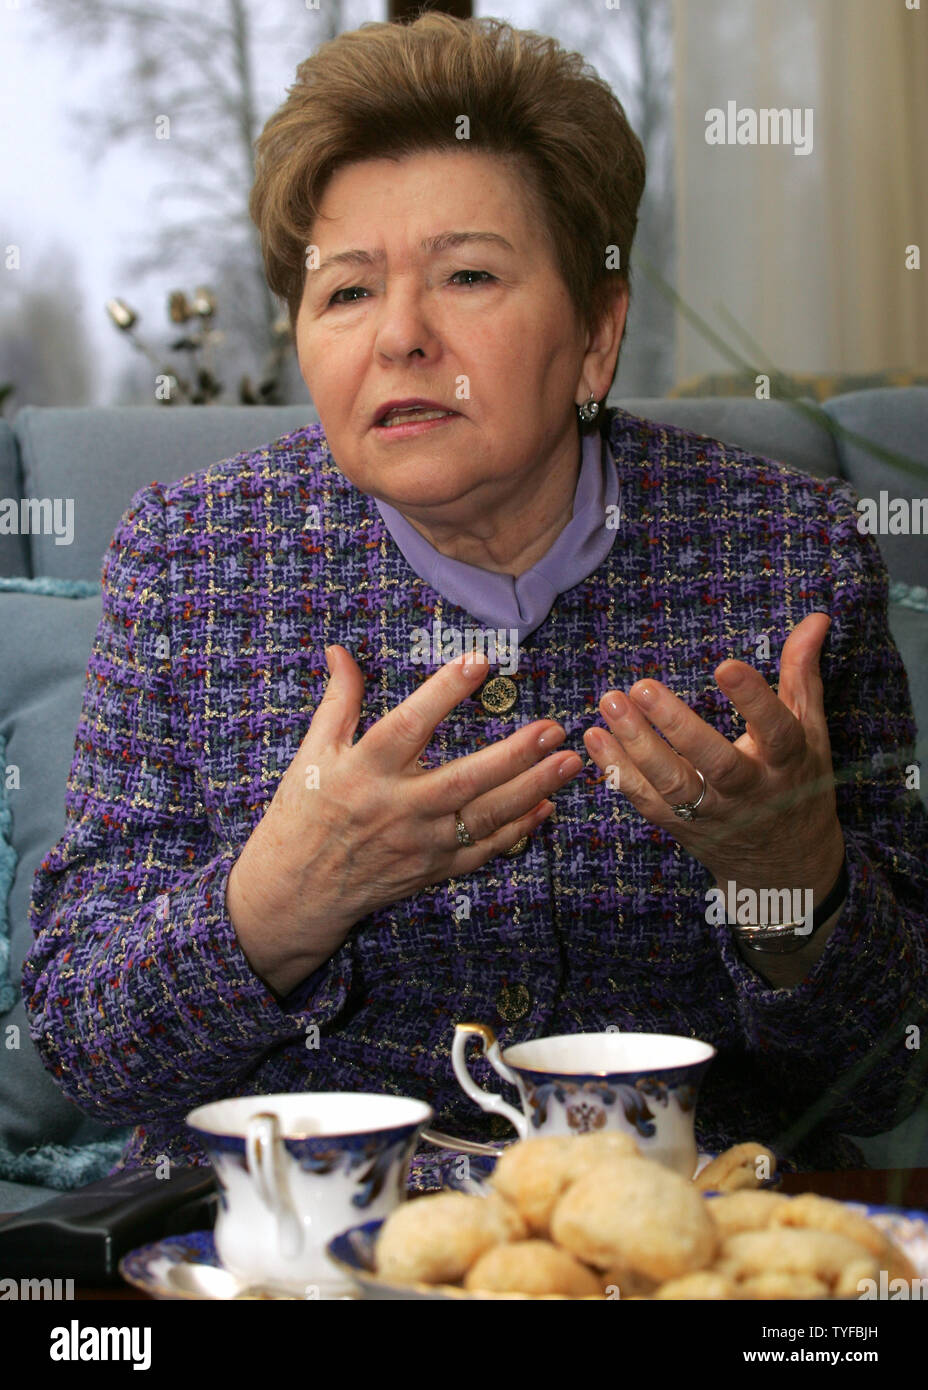 In this file photo, former President Boris Yeltsin's wife Naina speaks at their residence in Barvikha, the most presitigious and expensive suburb of Moscow  on January 30, 2006. Yeltsin died at the age of 76 on April 23, 2007 in Moscow. Yeltsin pushed Russia to democracy and a market economy after helping in the collapse of the Soviet Union communist state in 1991.  (UPI Photo/Anatoli Zhdanov) Stock Photo